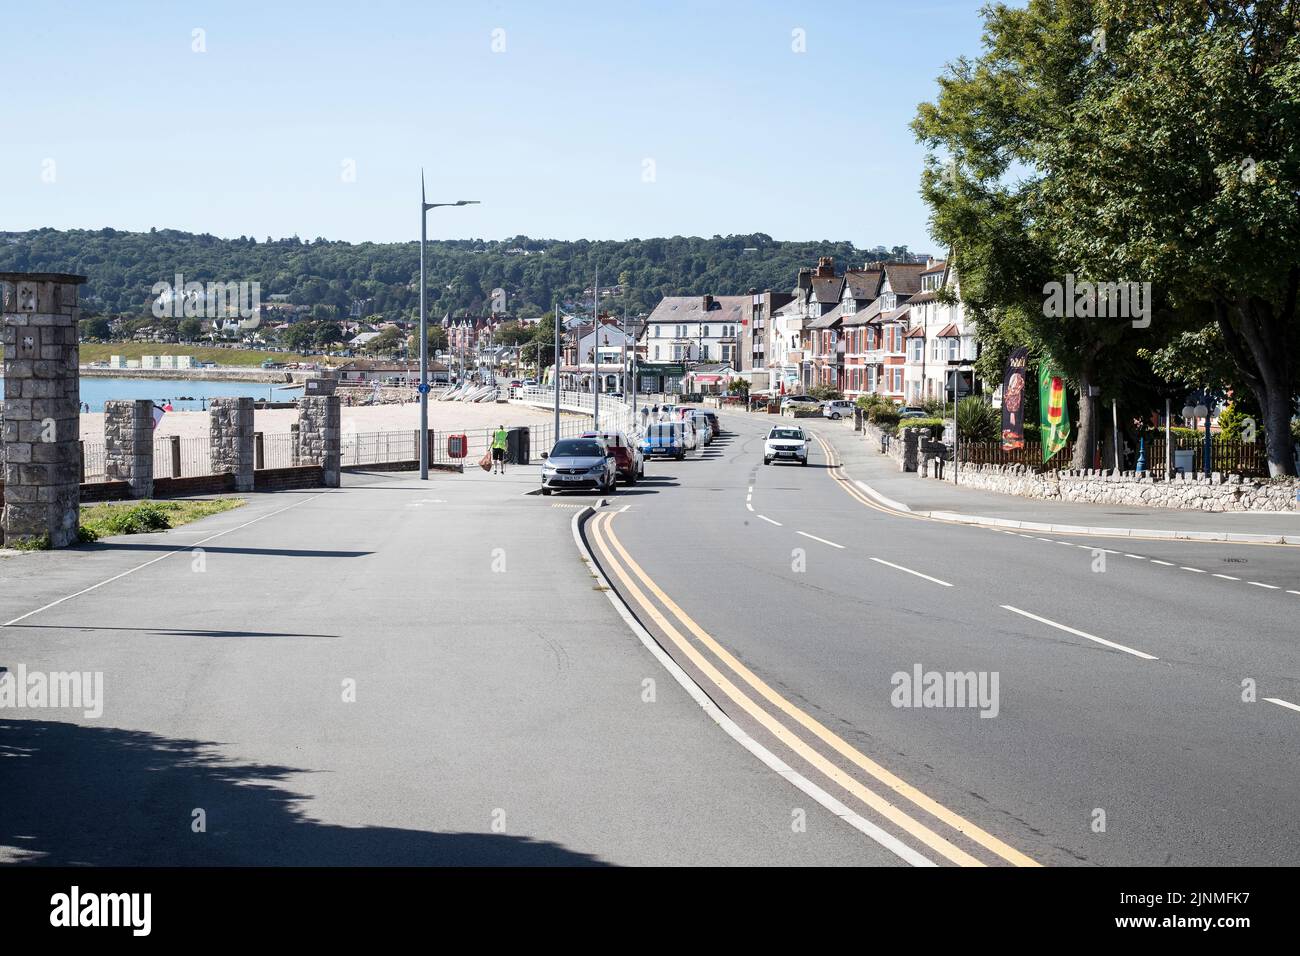 Rhos on Sea Tourist resort from Rhos Point in North Wales with hotels, apartments, accommodation and sandy beaches, harbour and shops, Wales, U.K. Stock Photo